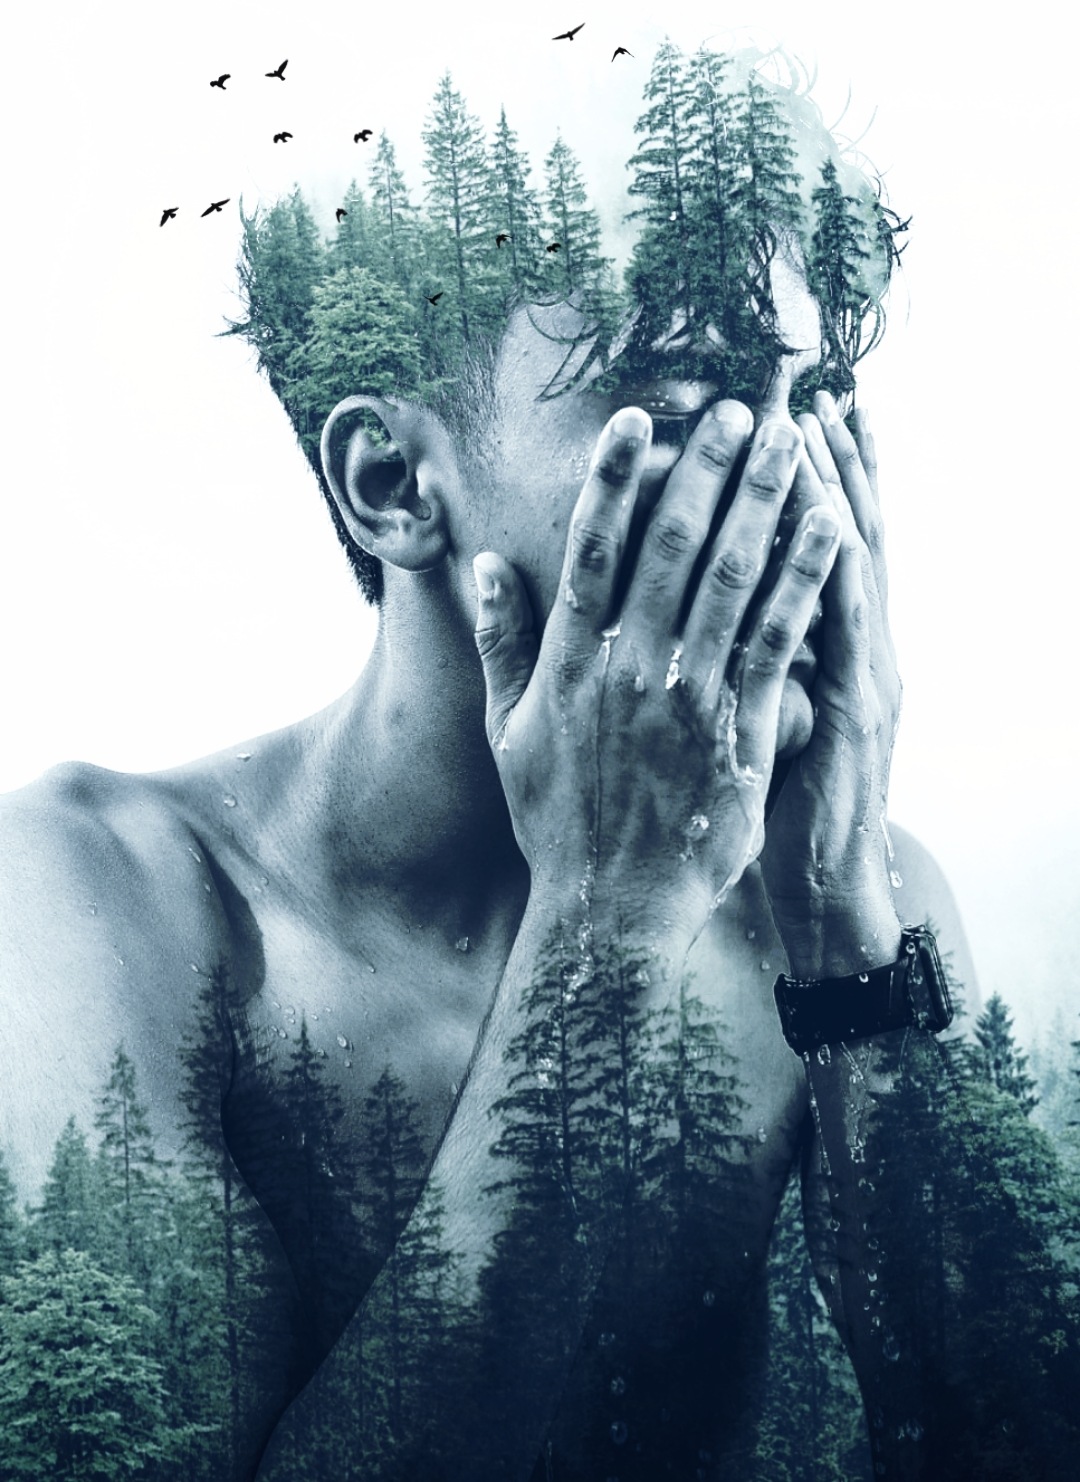 #mastershoutout to @hectordiaz24 gallery #doubleexposure #blending #photomanipulation #artisticportrait #edited #forest #drawtools #filters #madewithpicsa